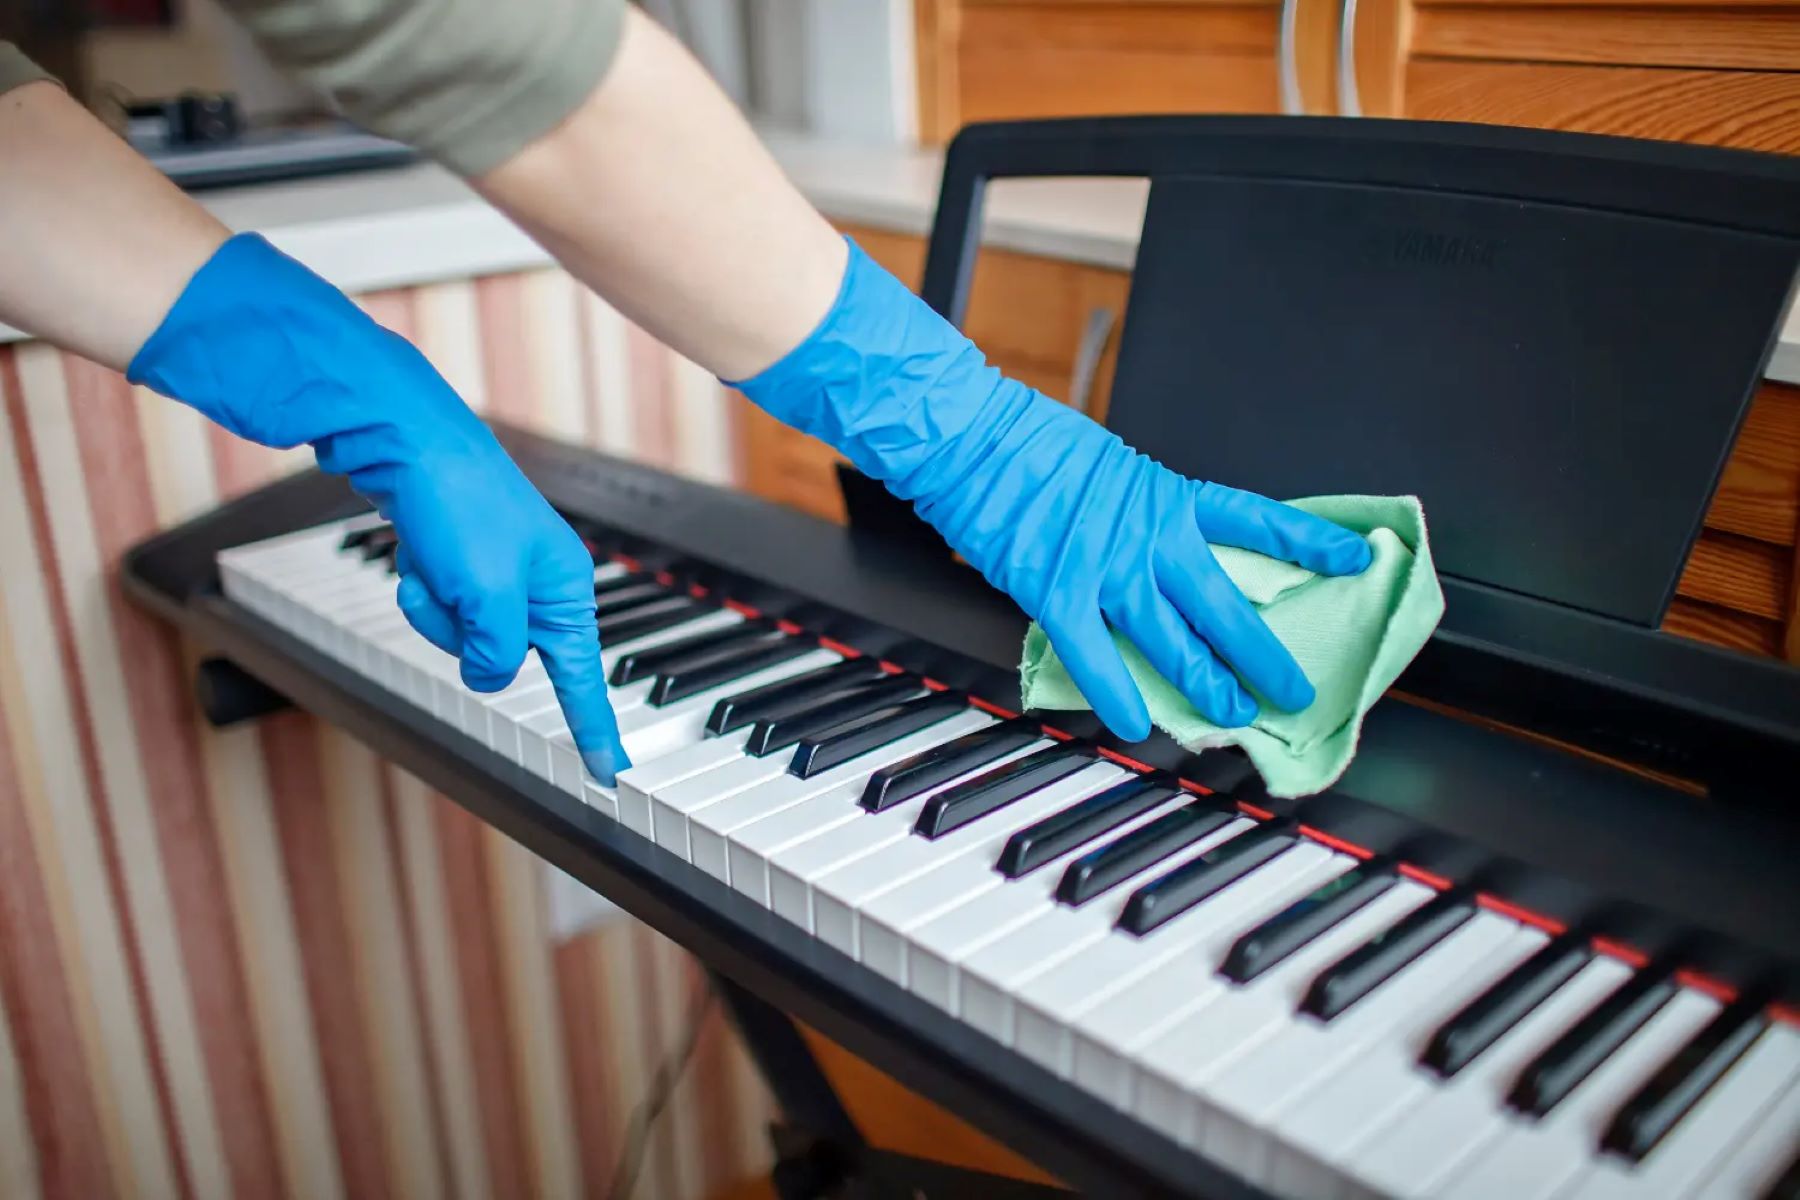 How To Take Care Of A Digital Piano